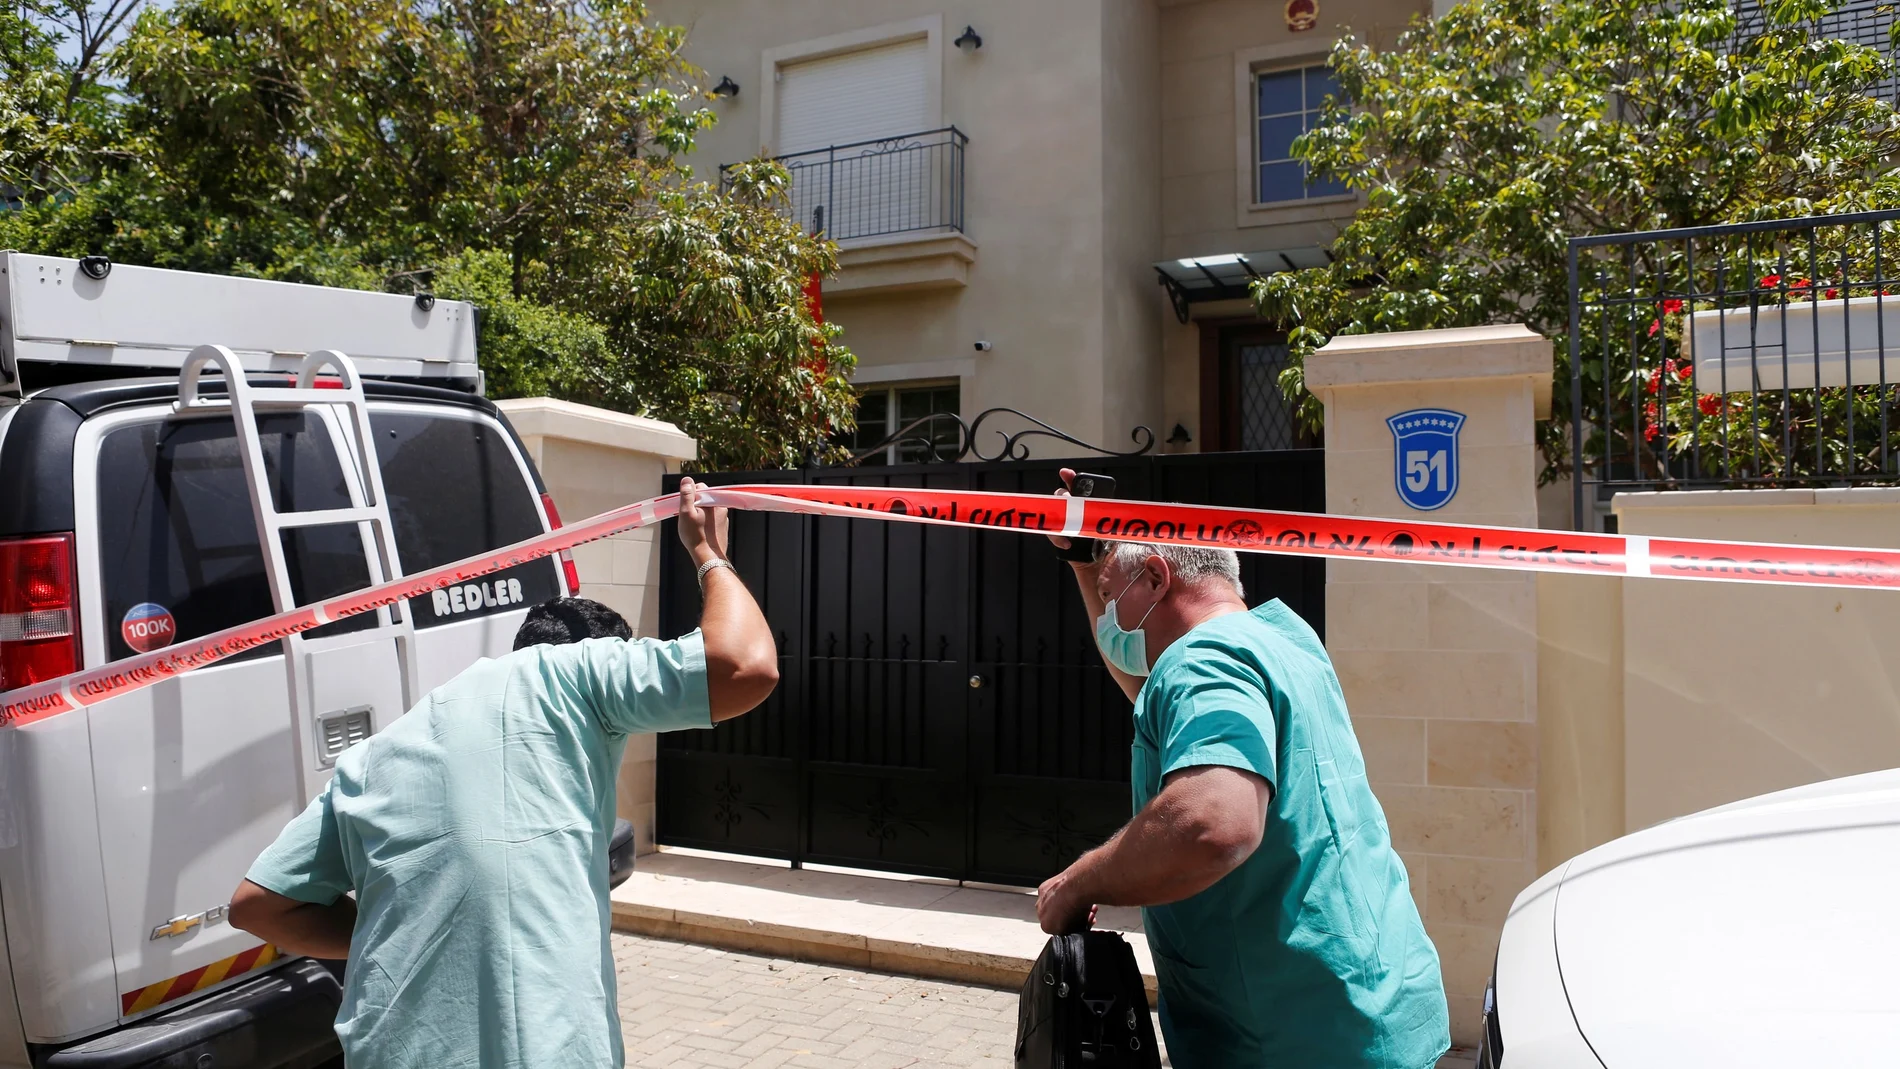 Doctor Chen Kugel, head of Israel National Center of Forensic Medicine and his colleague, pass through a police cordon as they enter China's ambassador to Israel, Du Wei's house in Herzliya, near Tel Aviv, Israel